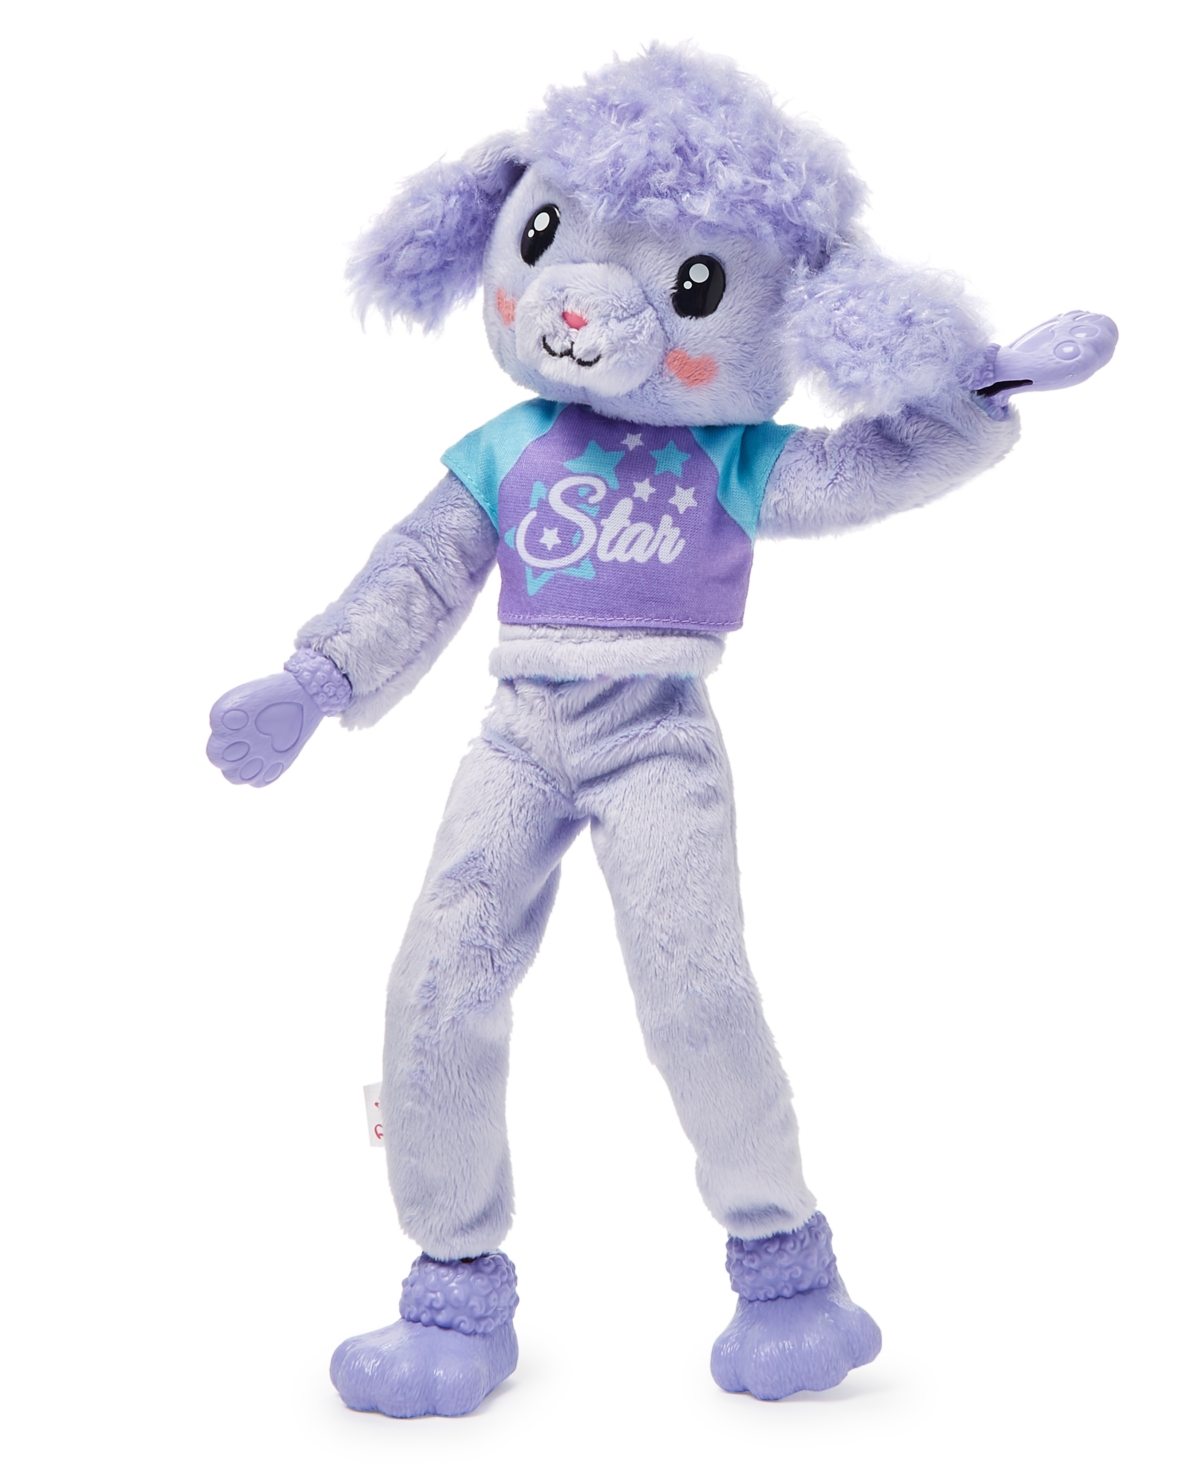 Barbie Kids' Cutie Reveal Doll And Accessories, Cozy Cute T-shirts Poodle, "star" T-shirt, Blue And Purple Streak In Multi-color